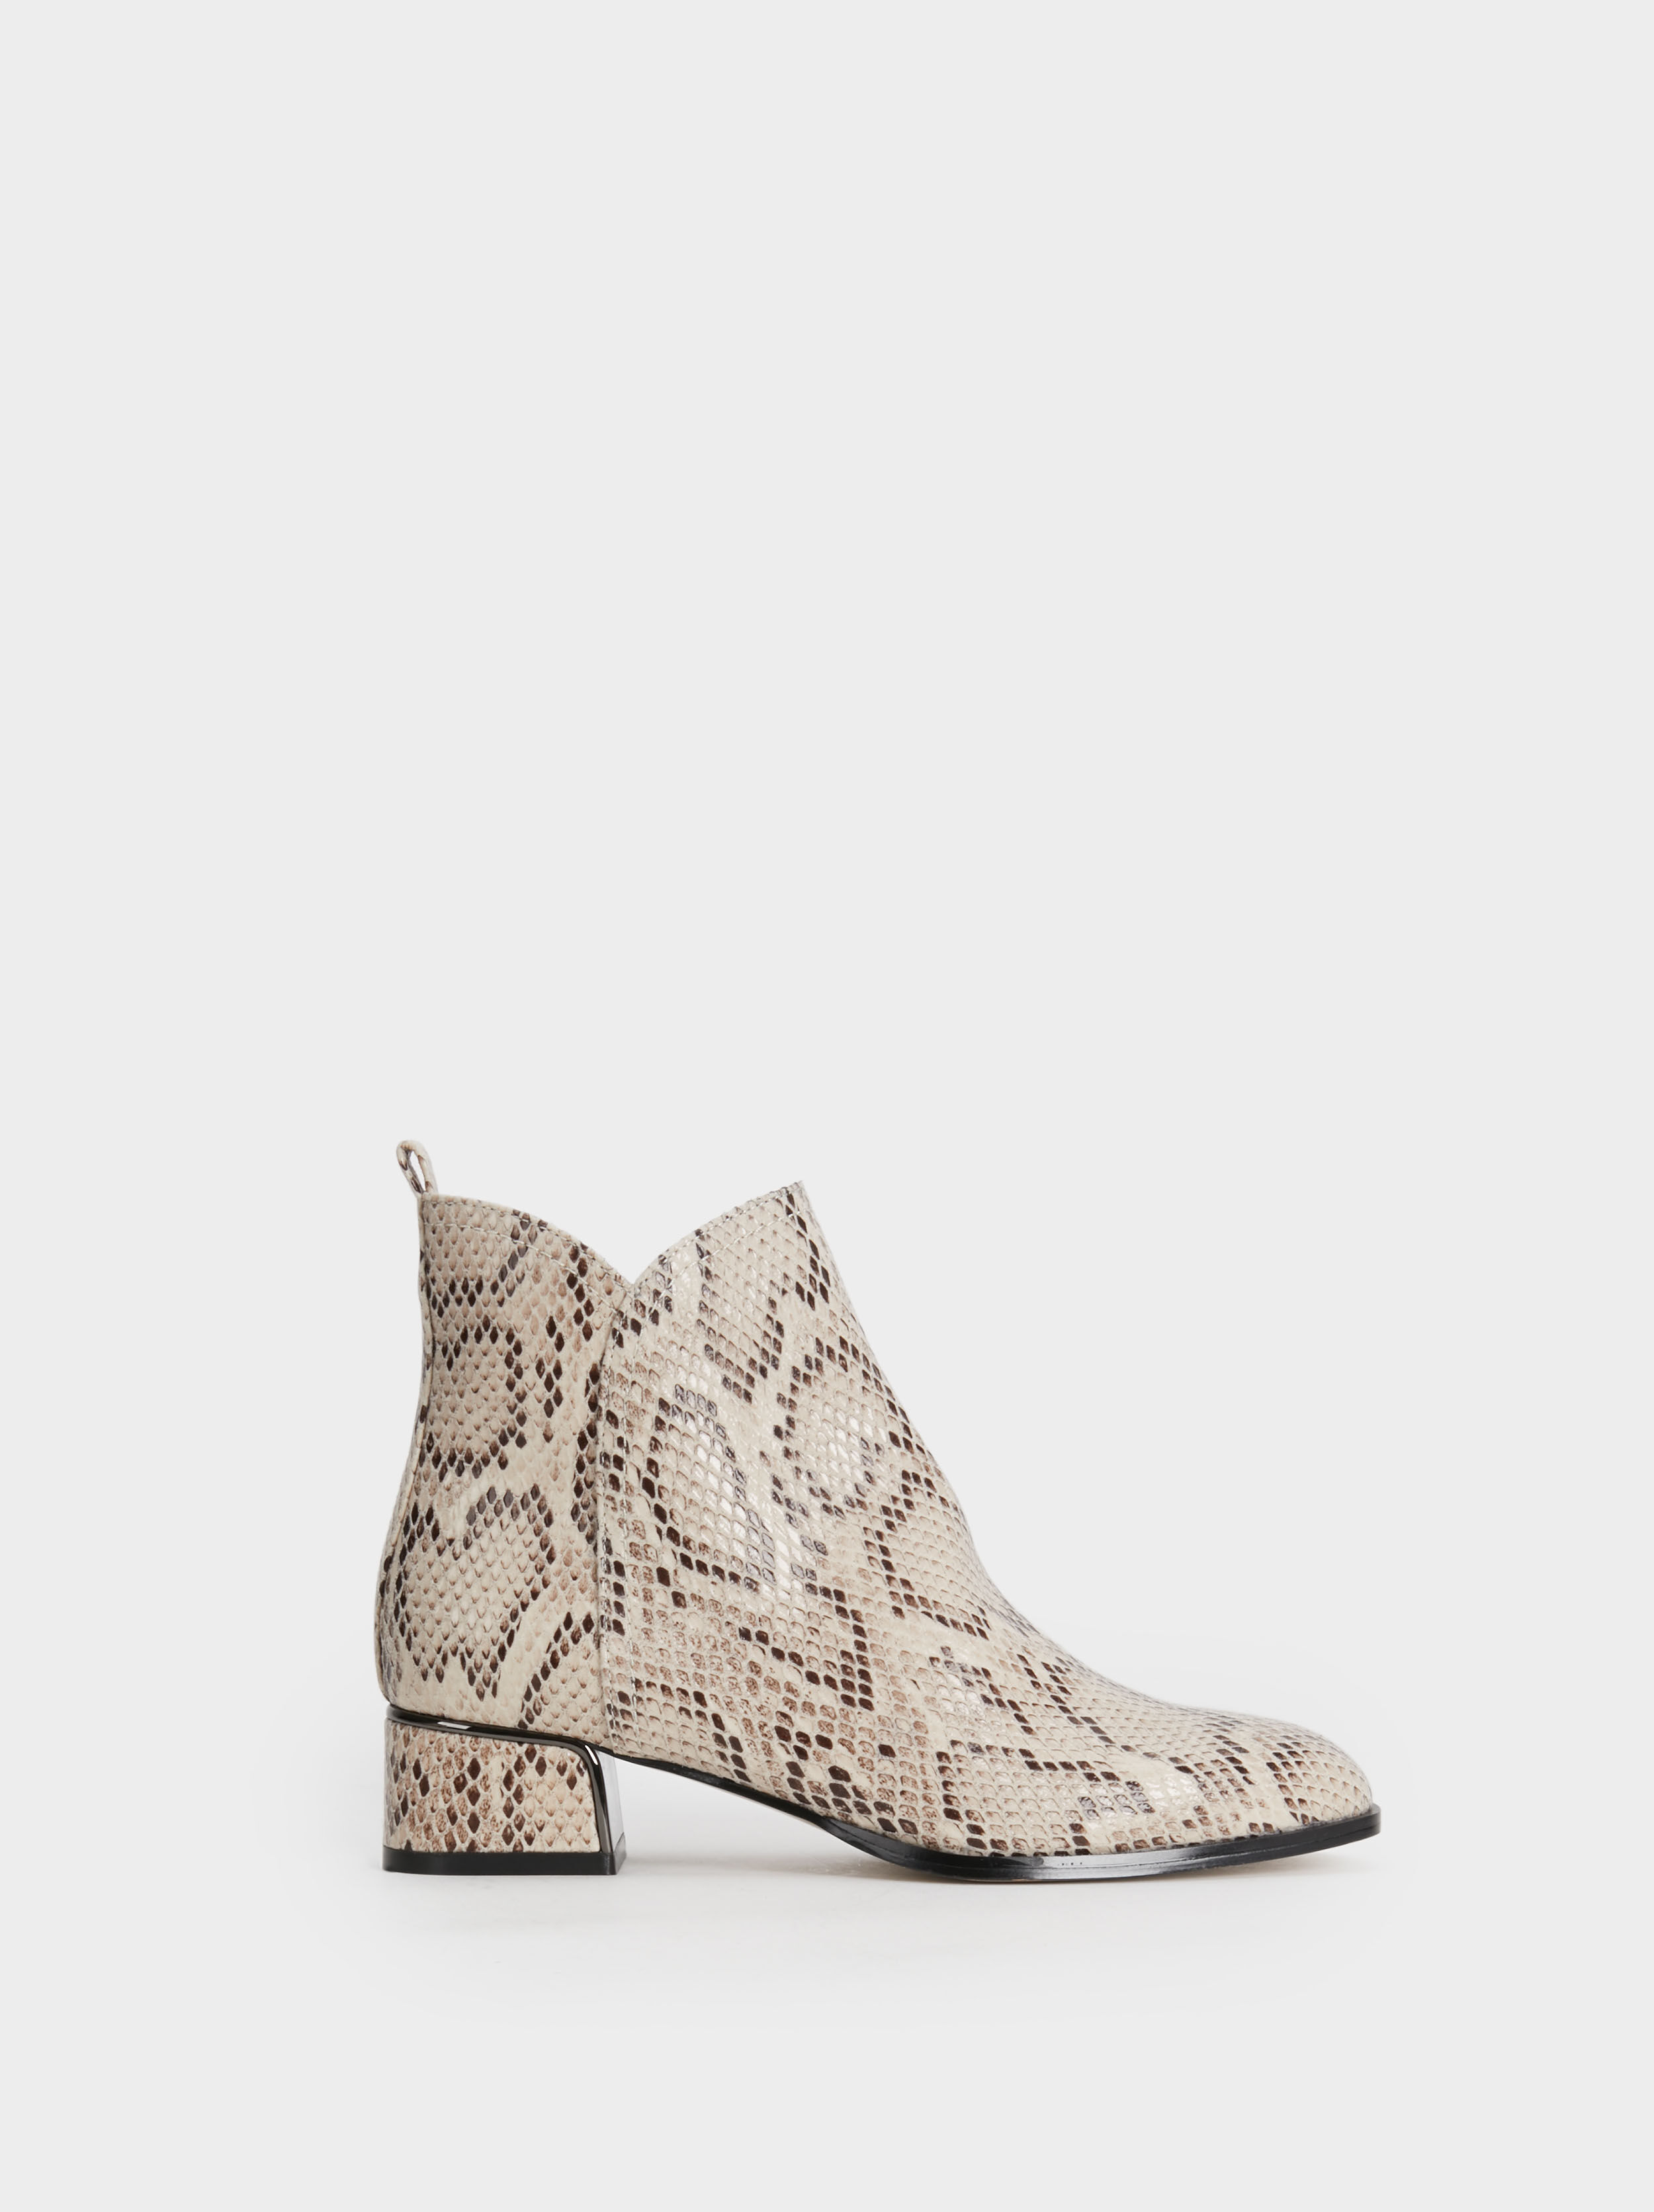 Faux Snakeskin Ankle Boots - White 